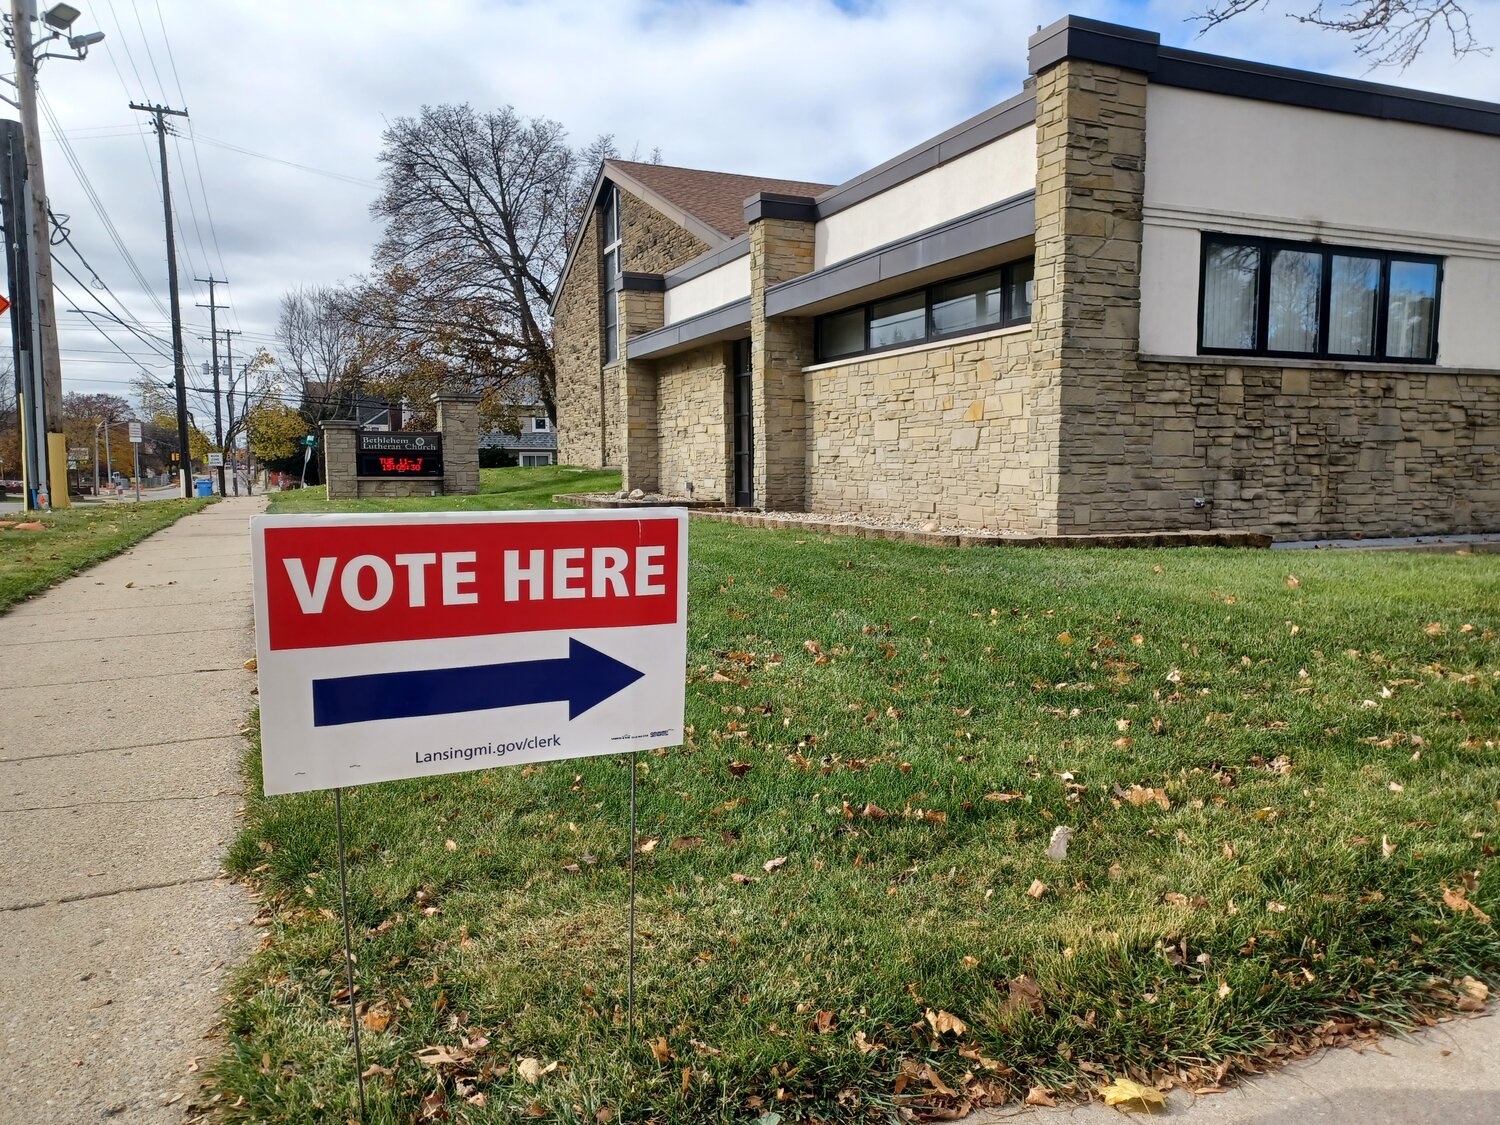 Bethlehem Lutheran Church, at 549 E. Mt. Hope Ave. in Lansing, hosted voters from four precincts today to save costs because of aniticipated low turnouts.